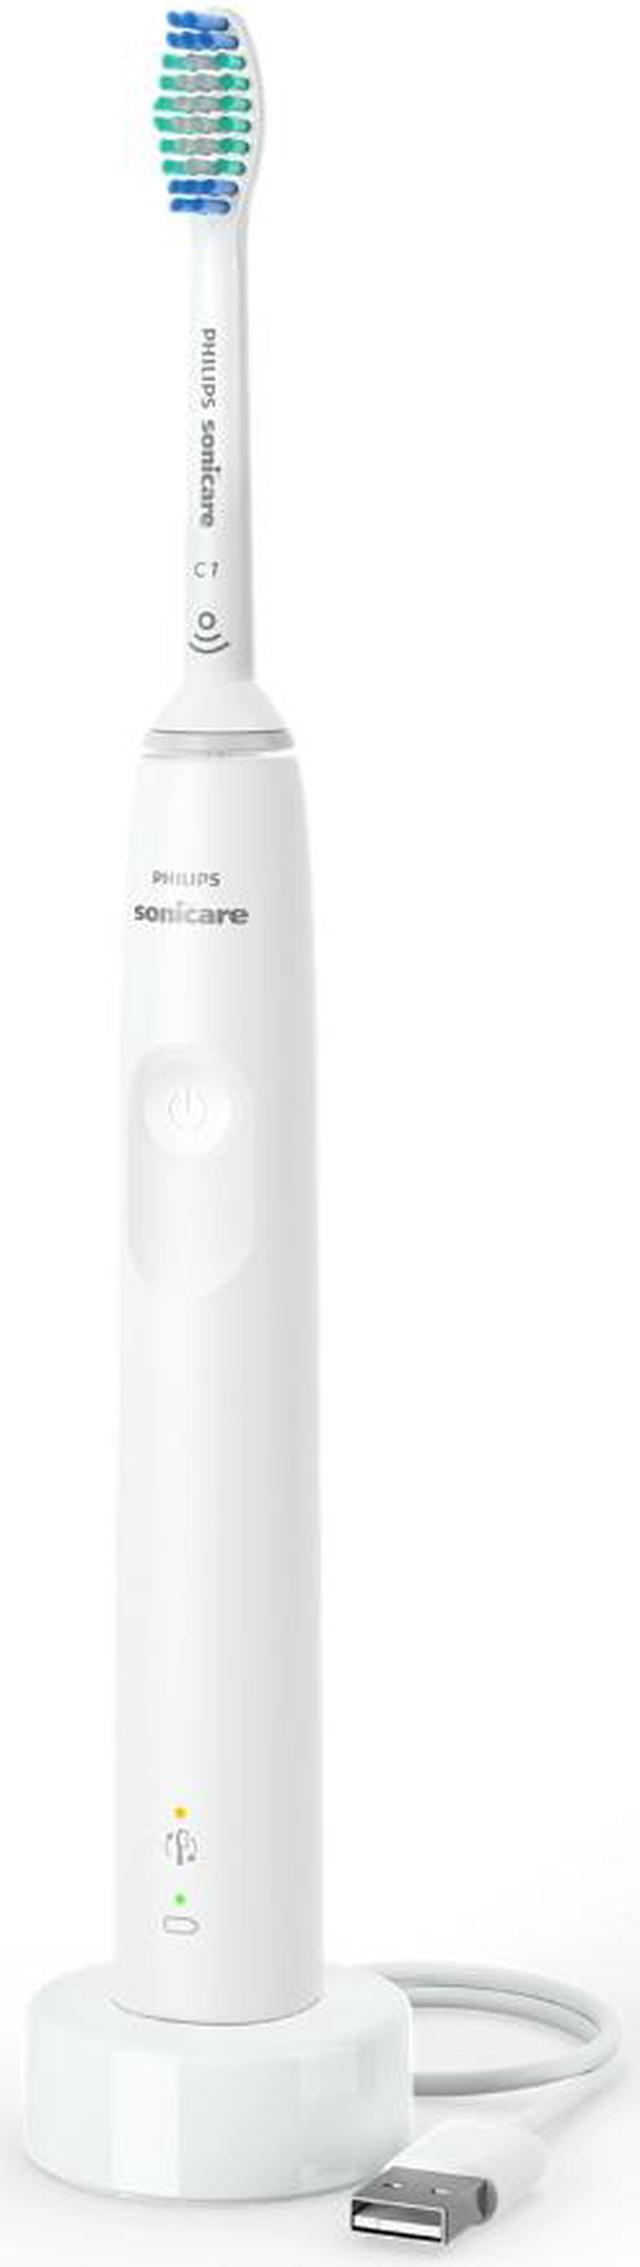 Philips Sonicare HX3681/03 3100 Power Toothbrush, Rechargeable